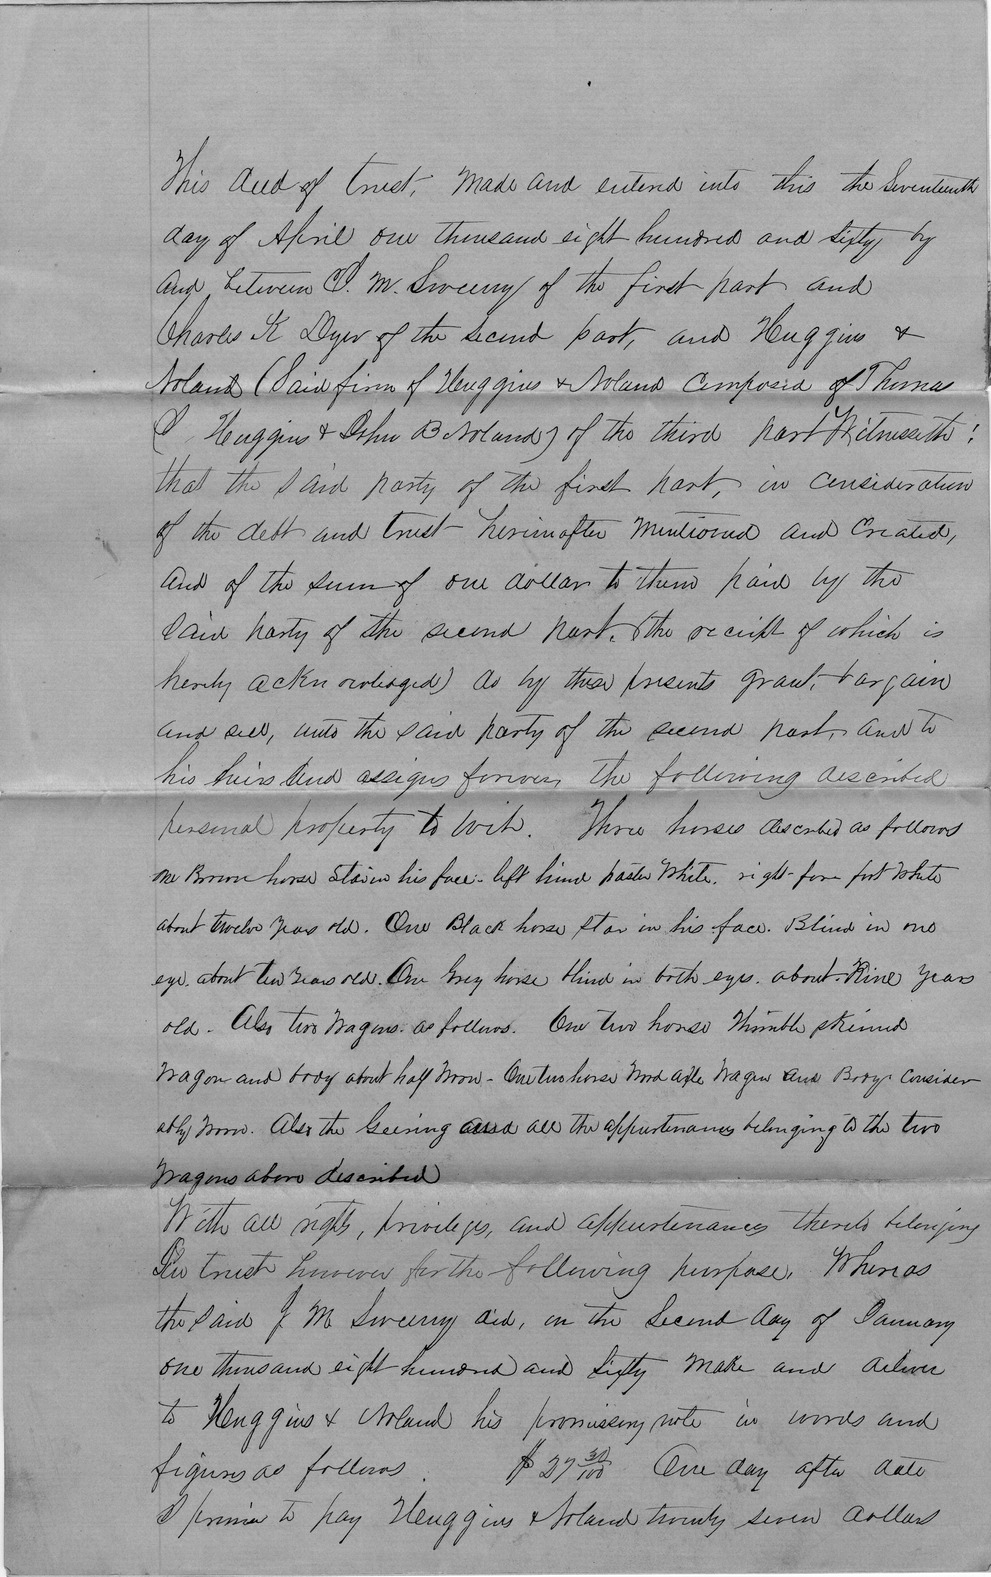 Deed of Trust from J. M. Sweeny to Huggins & Noland